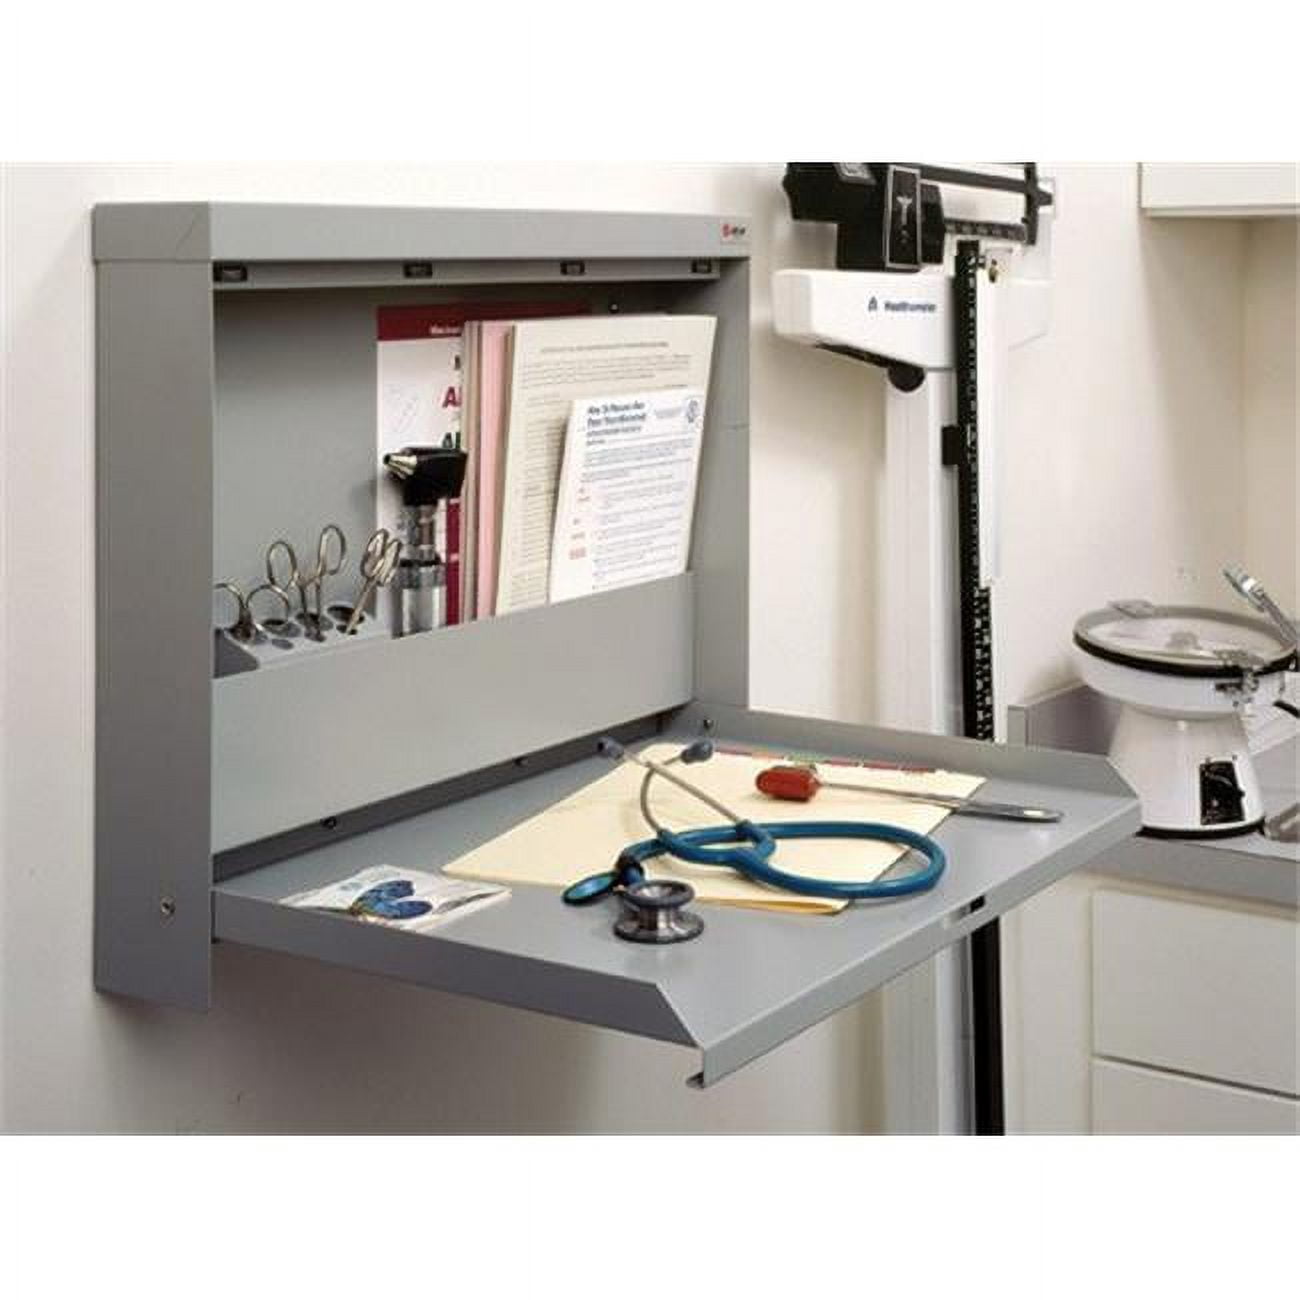 Picture of Datum Storage WW-100LT-C Locking Wall Write Mounted Desk with Electronic Lock